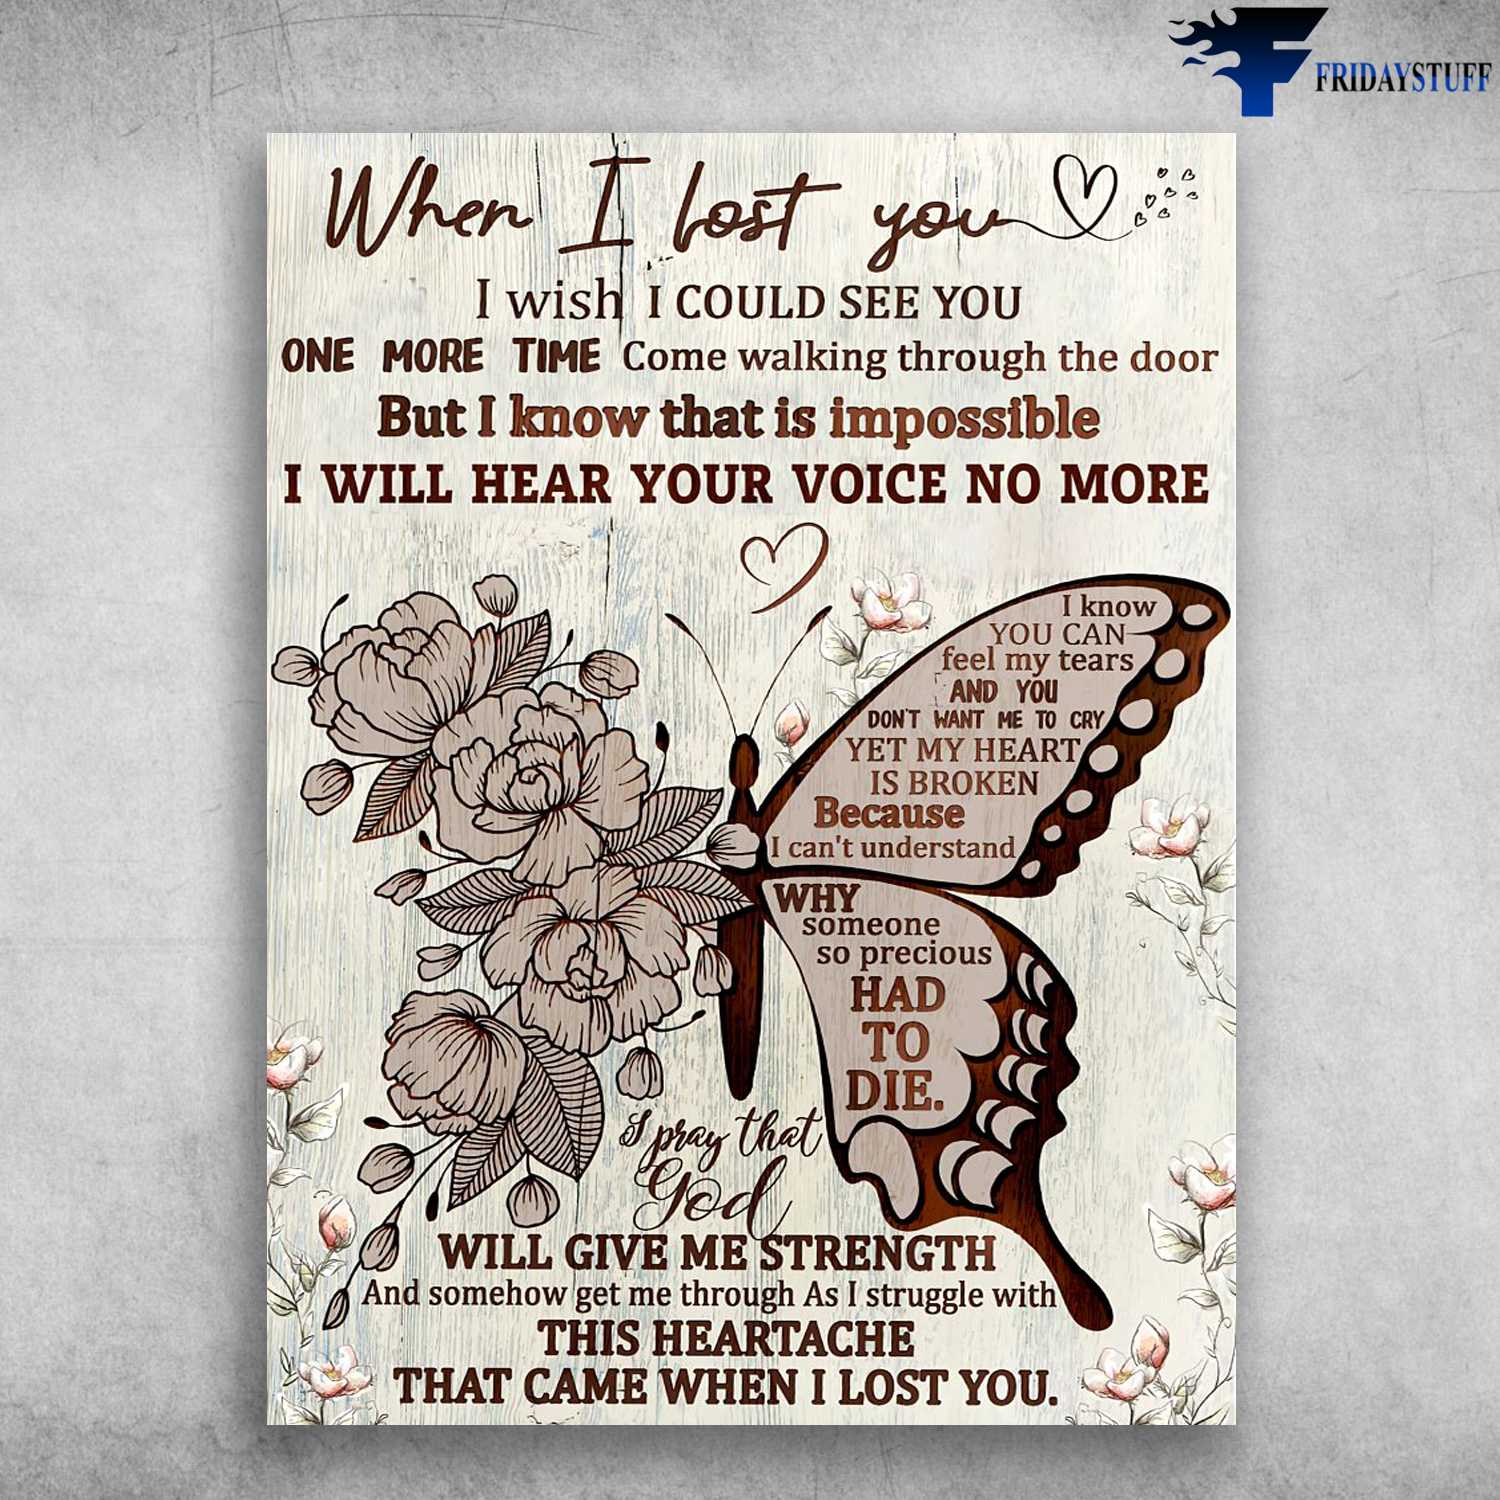 Butterfly Poster - When I Lost You, I Wish I Could See You, One More Time Come Walking Through The Door, But I Know That Is Impossible, I Will Hear Your Voice No More